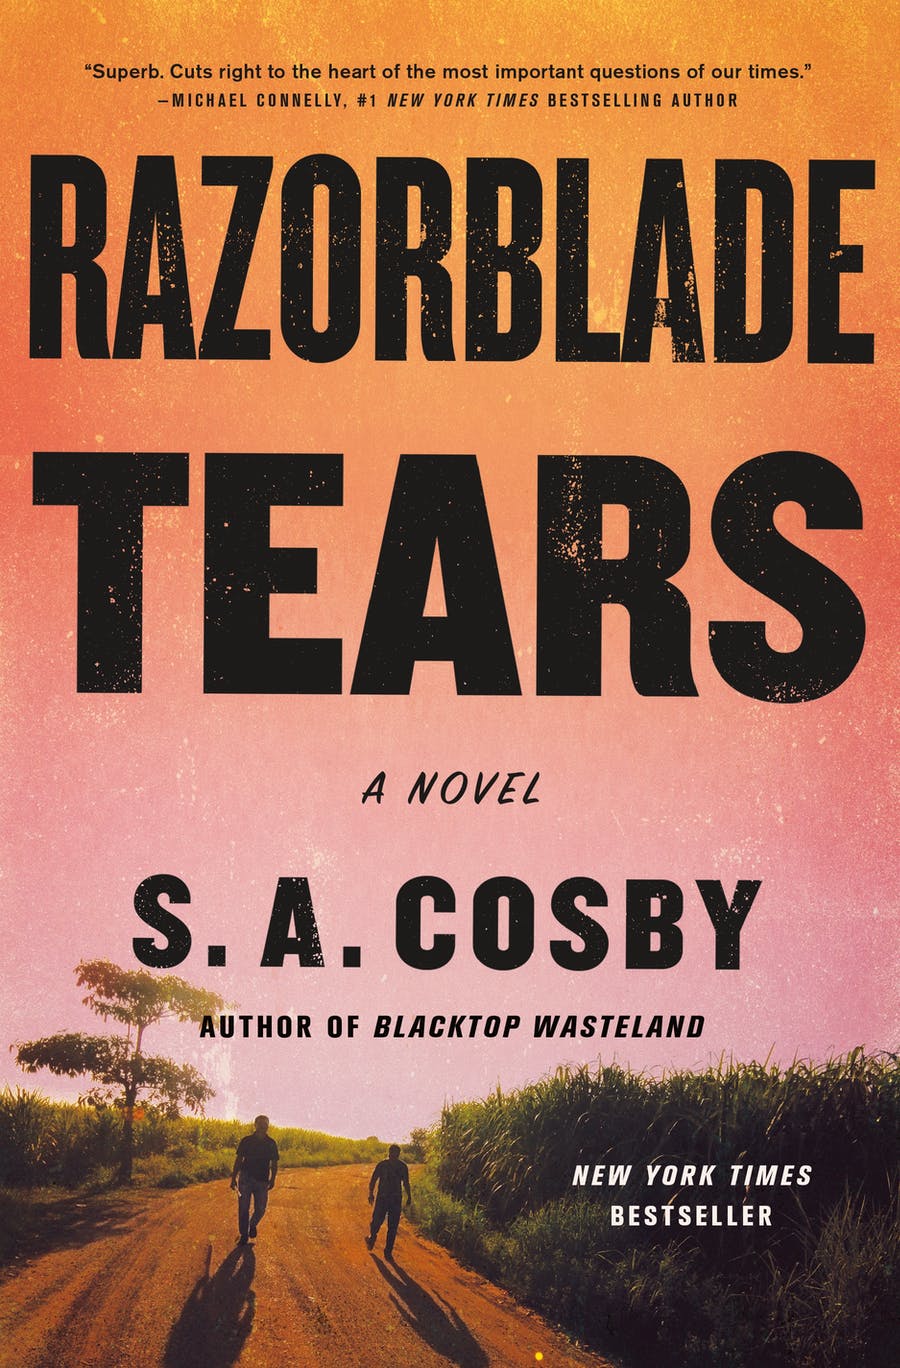 The book cover for 'Razorblade Tears' features a prominent title written in large black font, reading 'Razorblade Tears.' Below the title, in small handwritten letters, are the words 'a novel.' The author's name, S.A. Cosby, is displayed in larger black block text. The background image depicts a scenic view of two people walking down a dirt path at sunset. The sky is a blend of vibrant orange and pink hues. The path is flanked by short shrubs and trees on either side, creating a serene and natural setting.